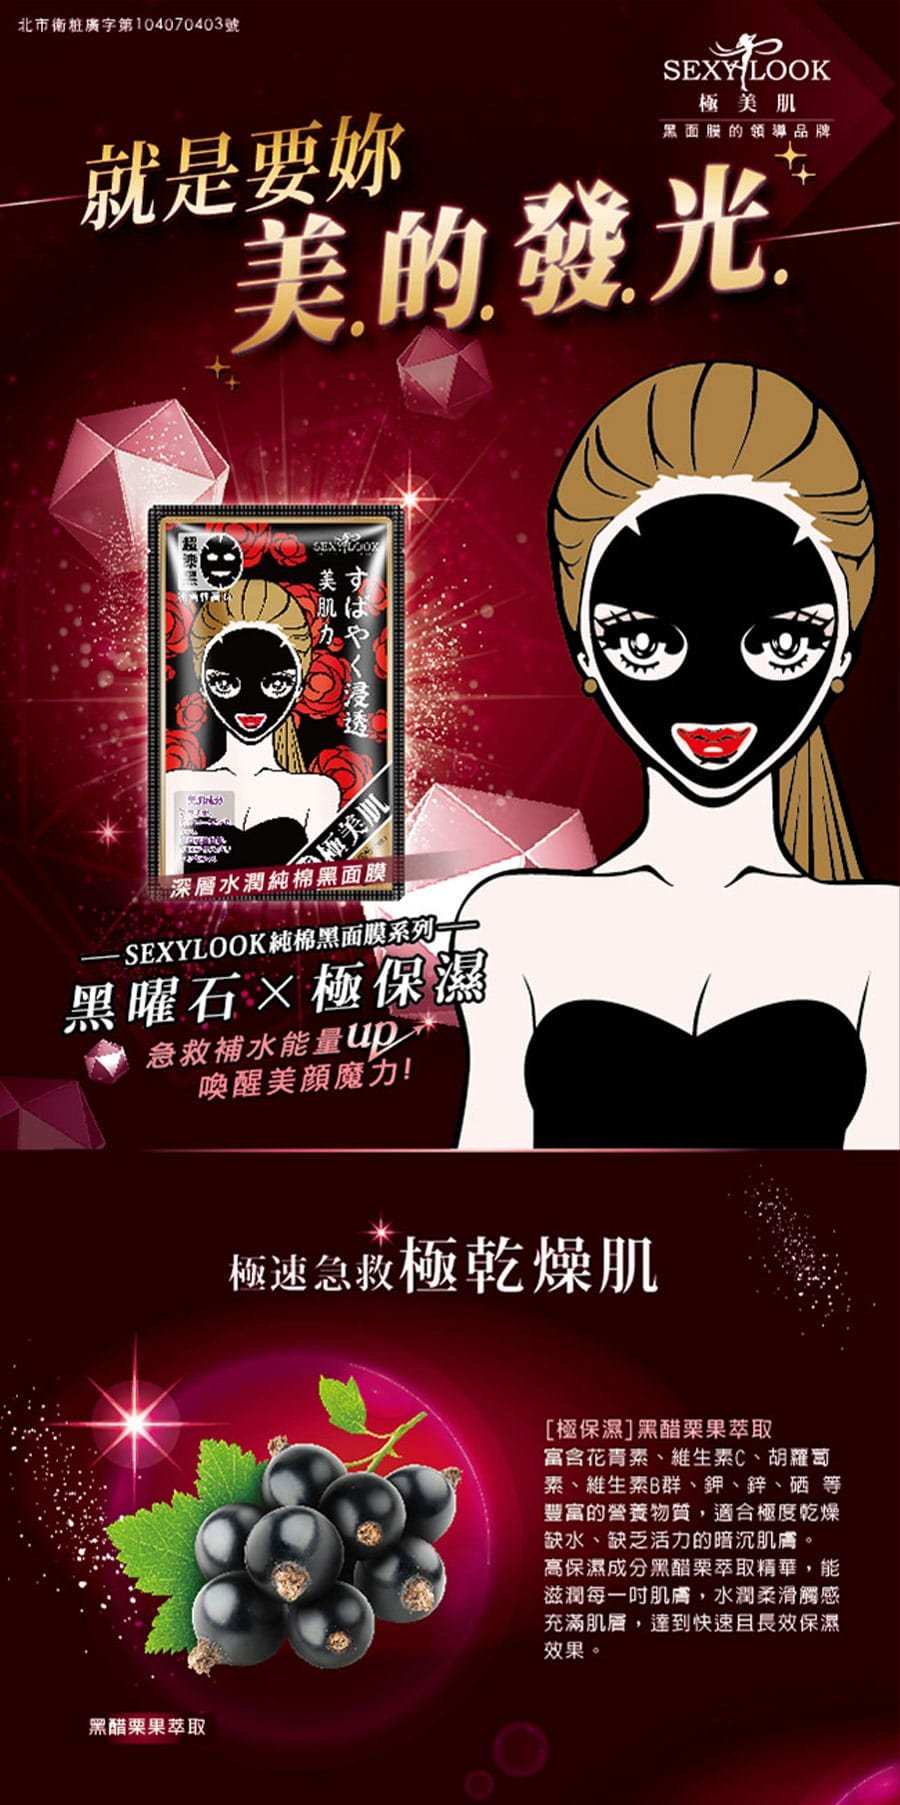 SexyLook Mask - 10th Anniversary Black Mask